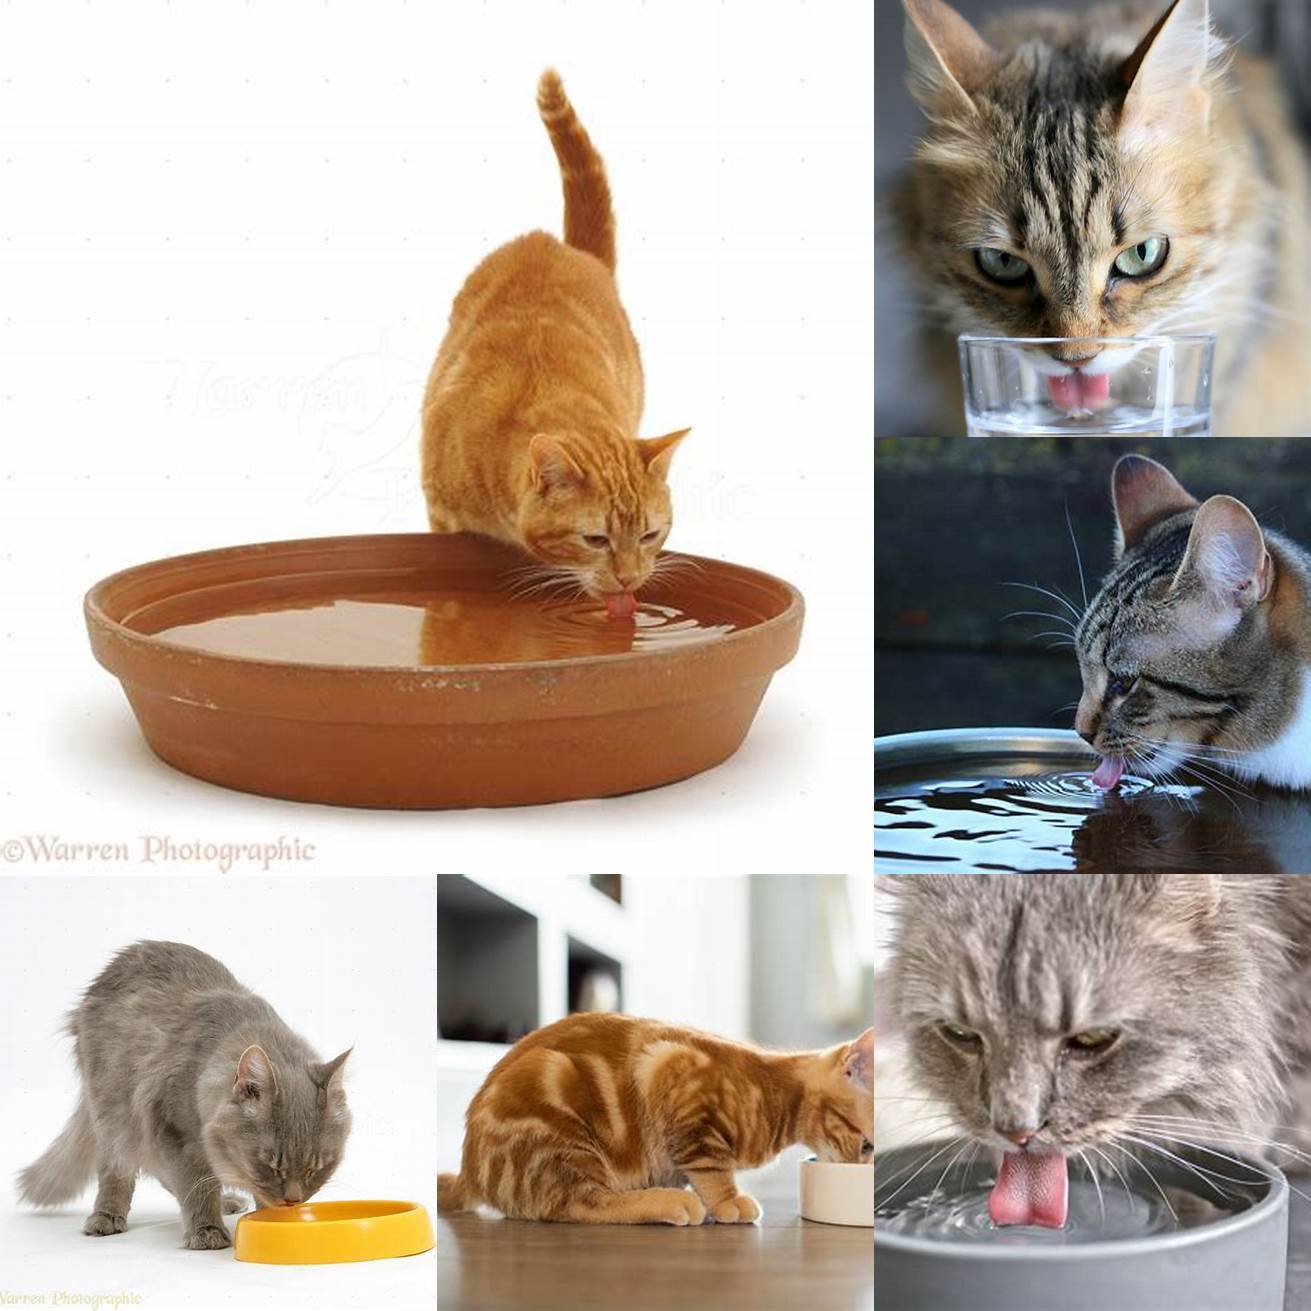 Image Idea 1 Cat Drinking from Water Bowl